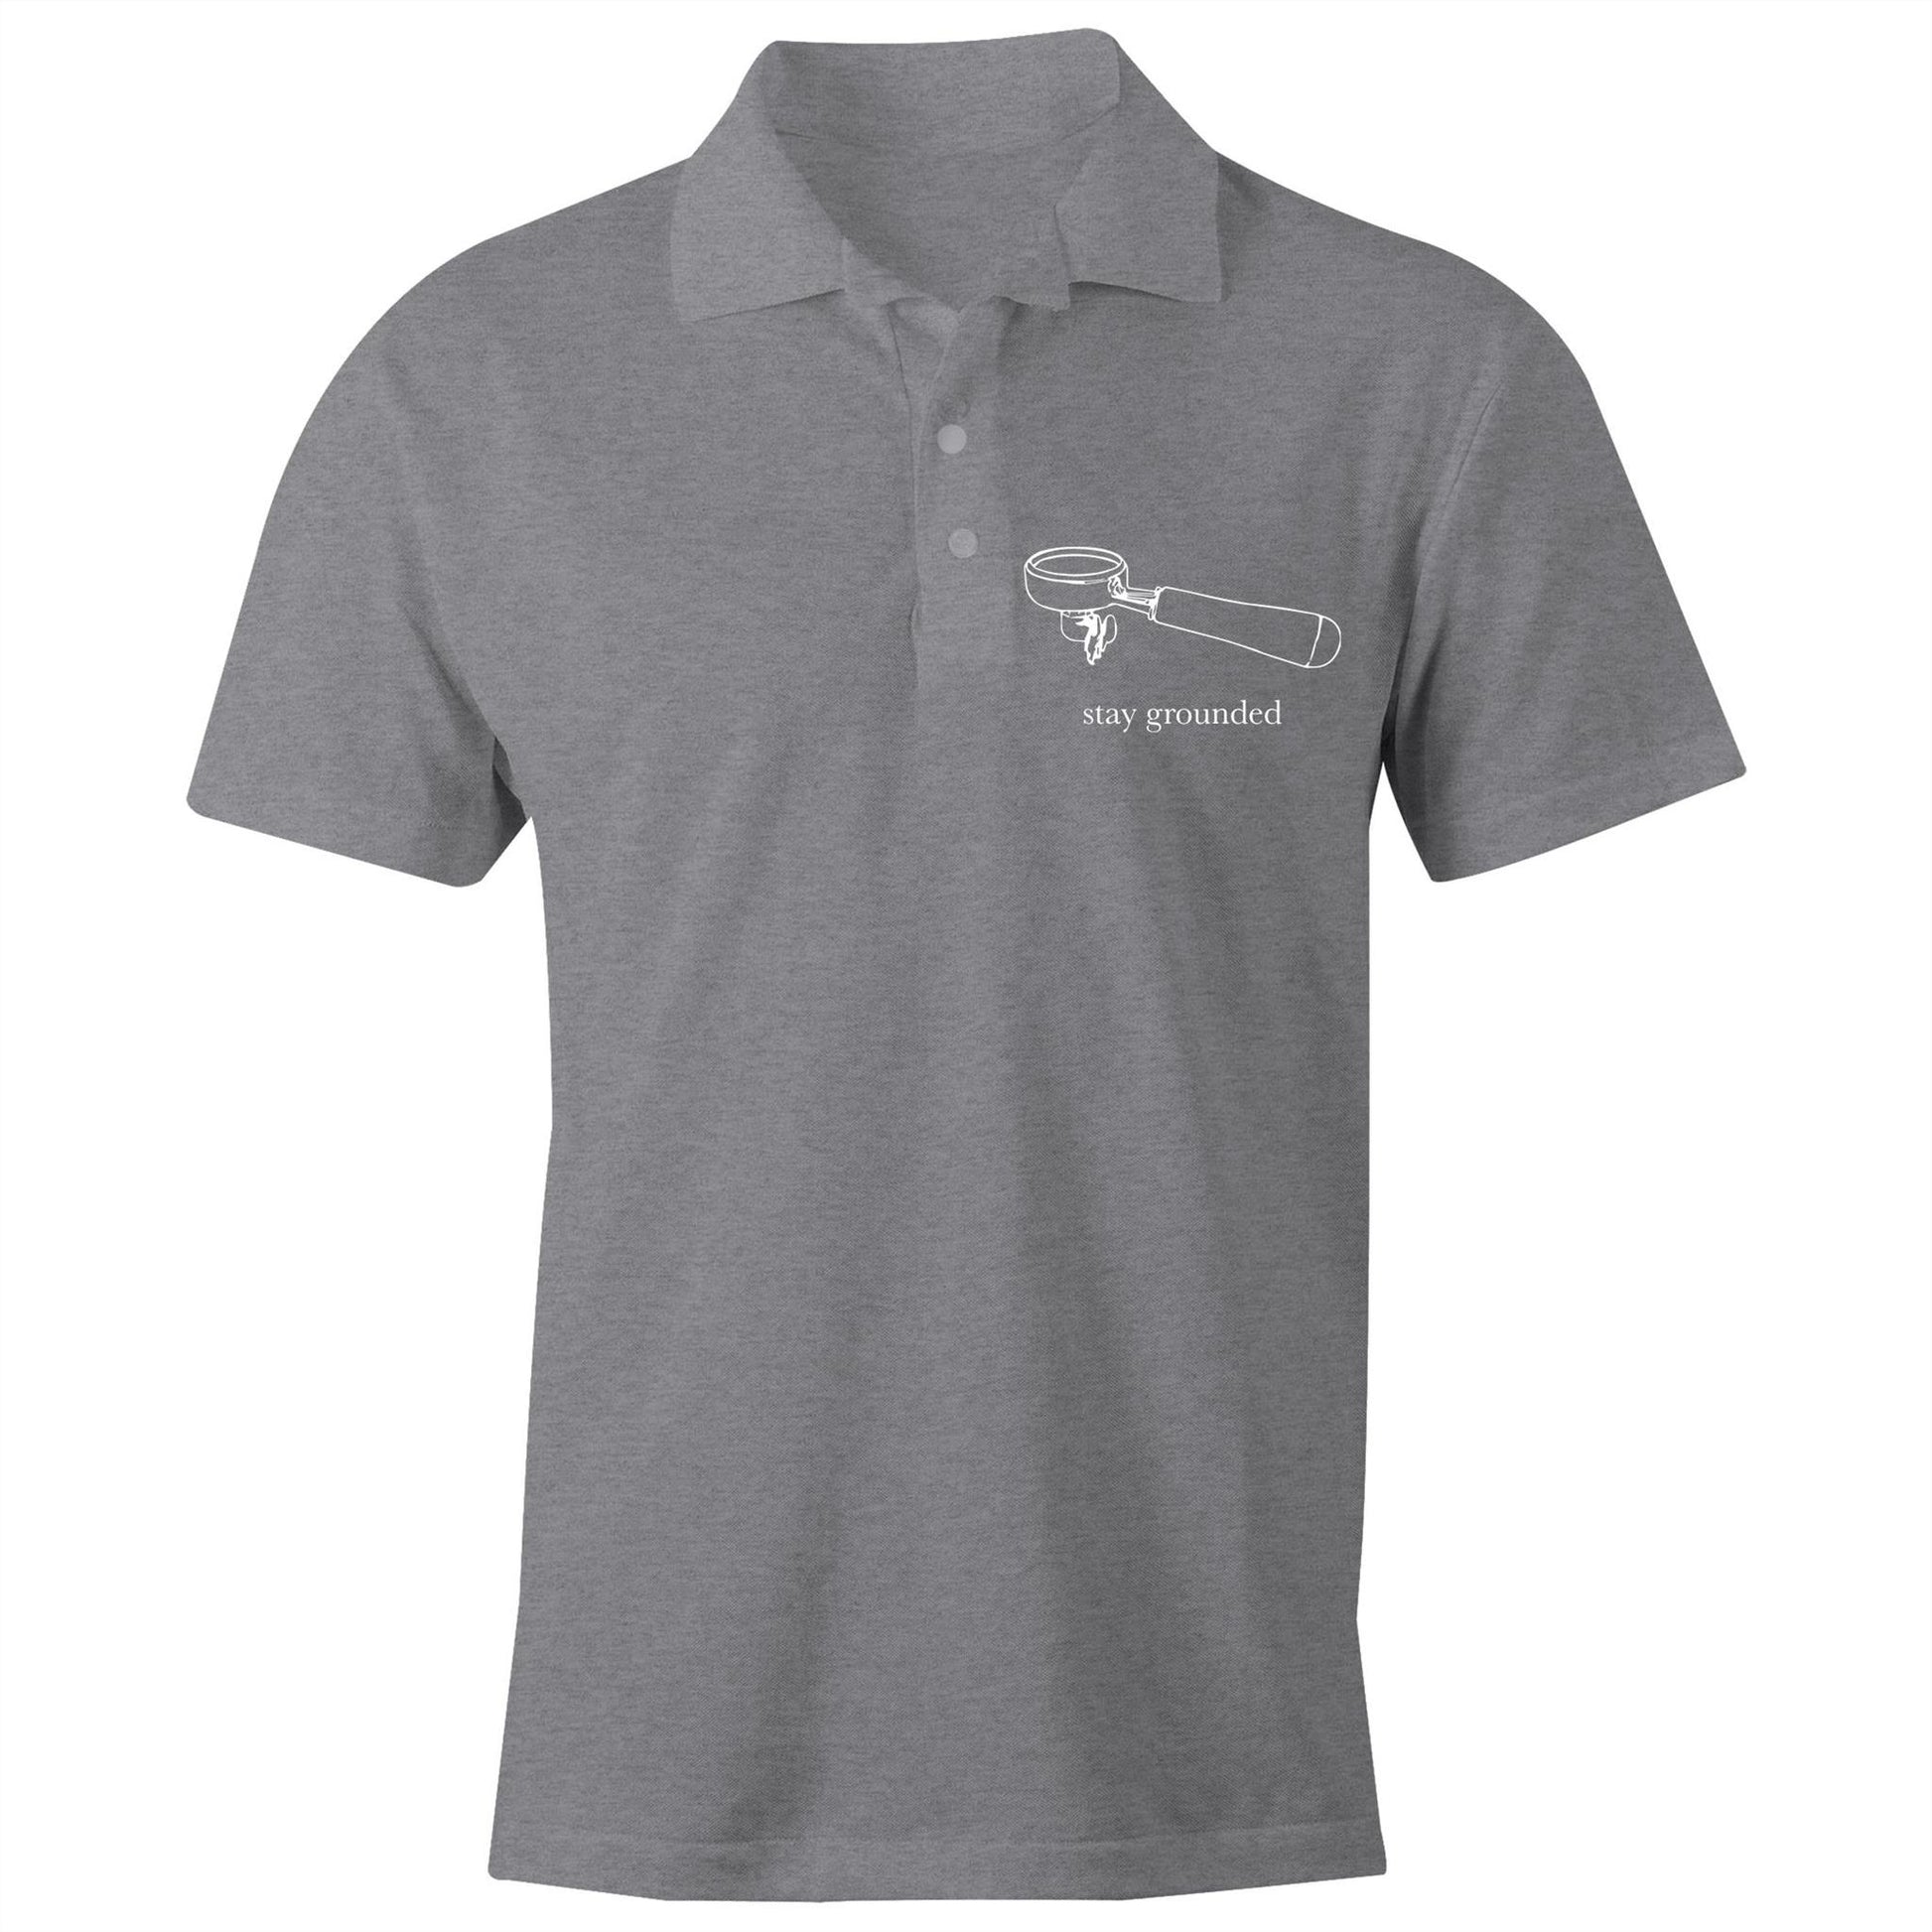 Stay Grounded - Chad S/S Polo Shirt, Printed Grey Marle Polo Shirt Coffee